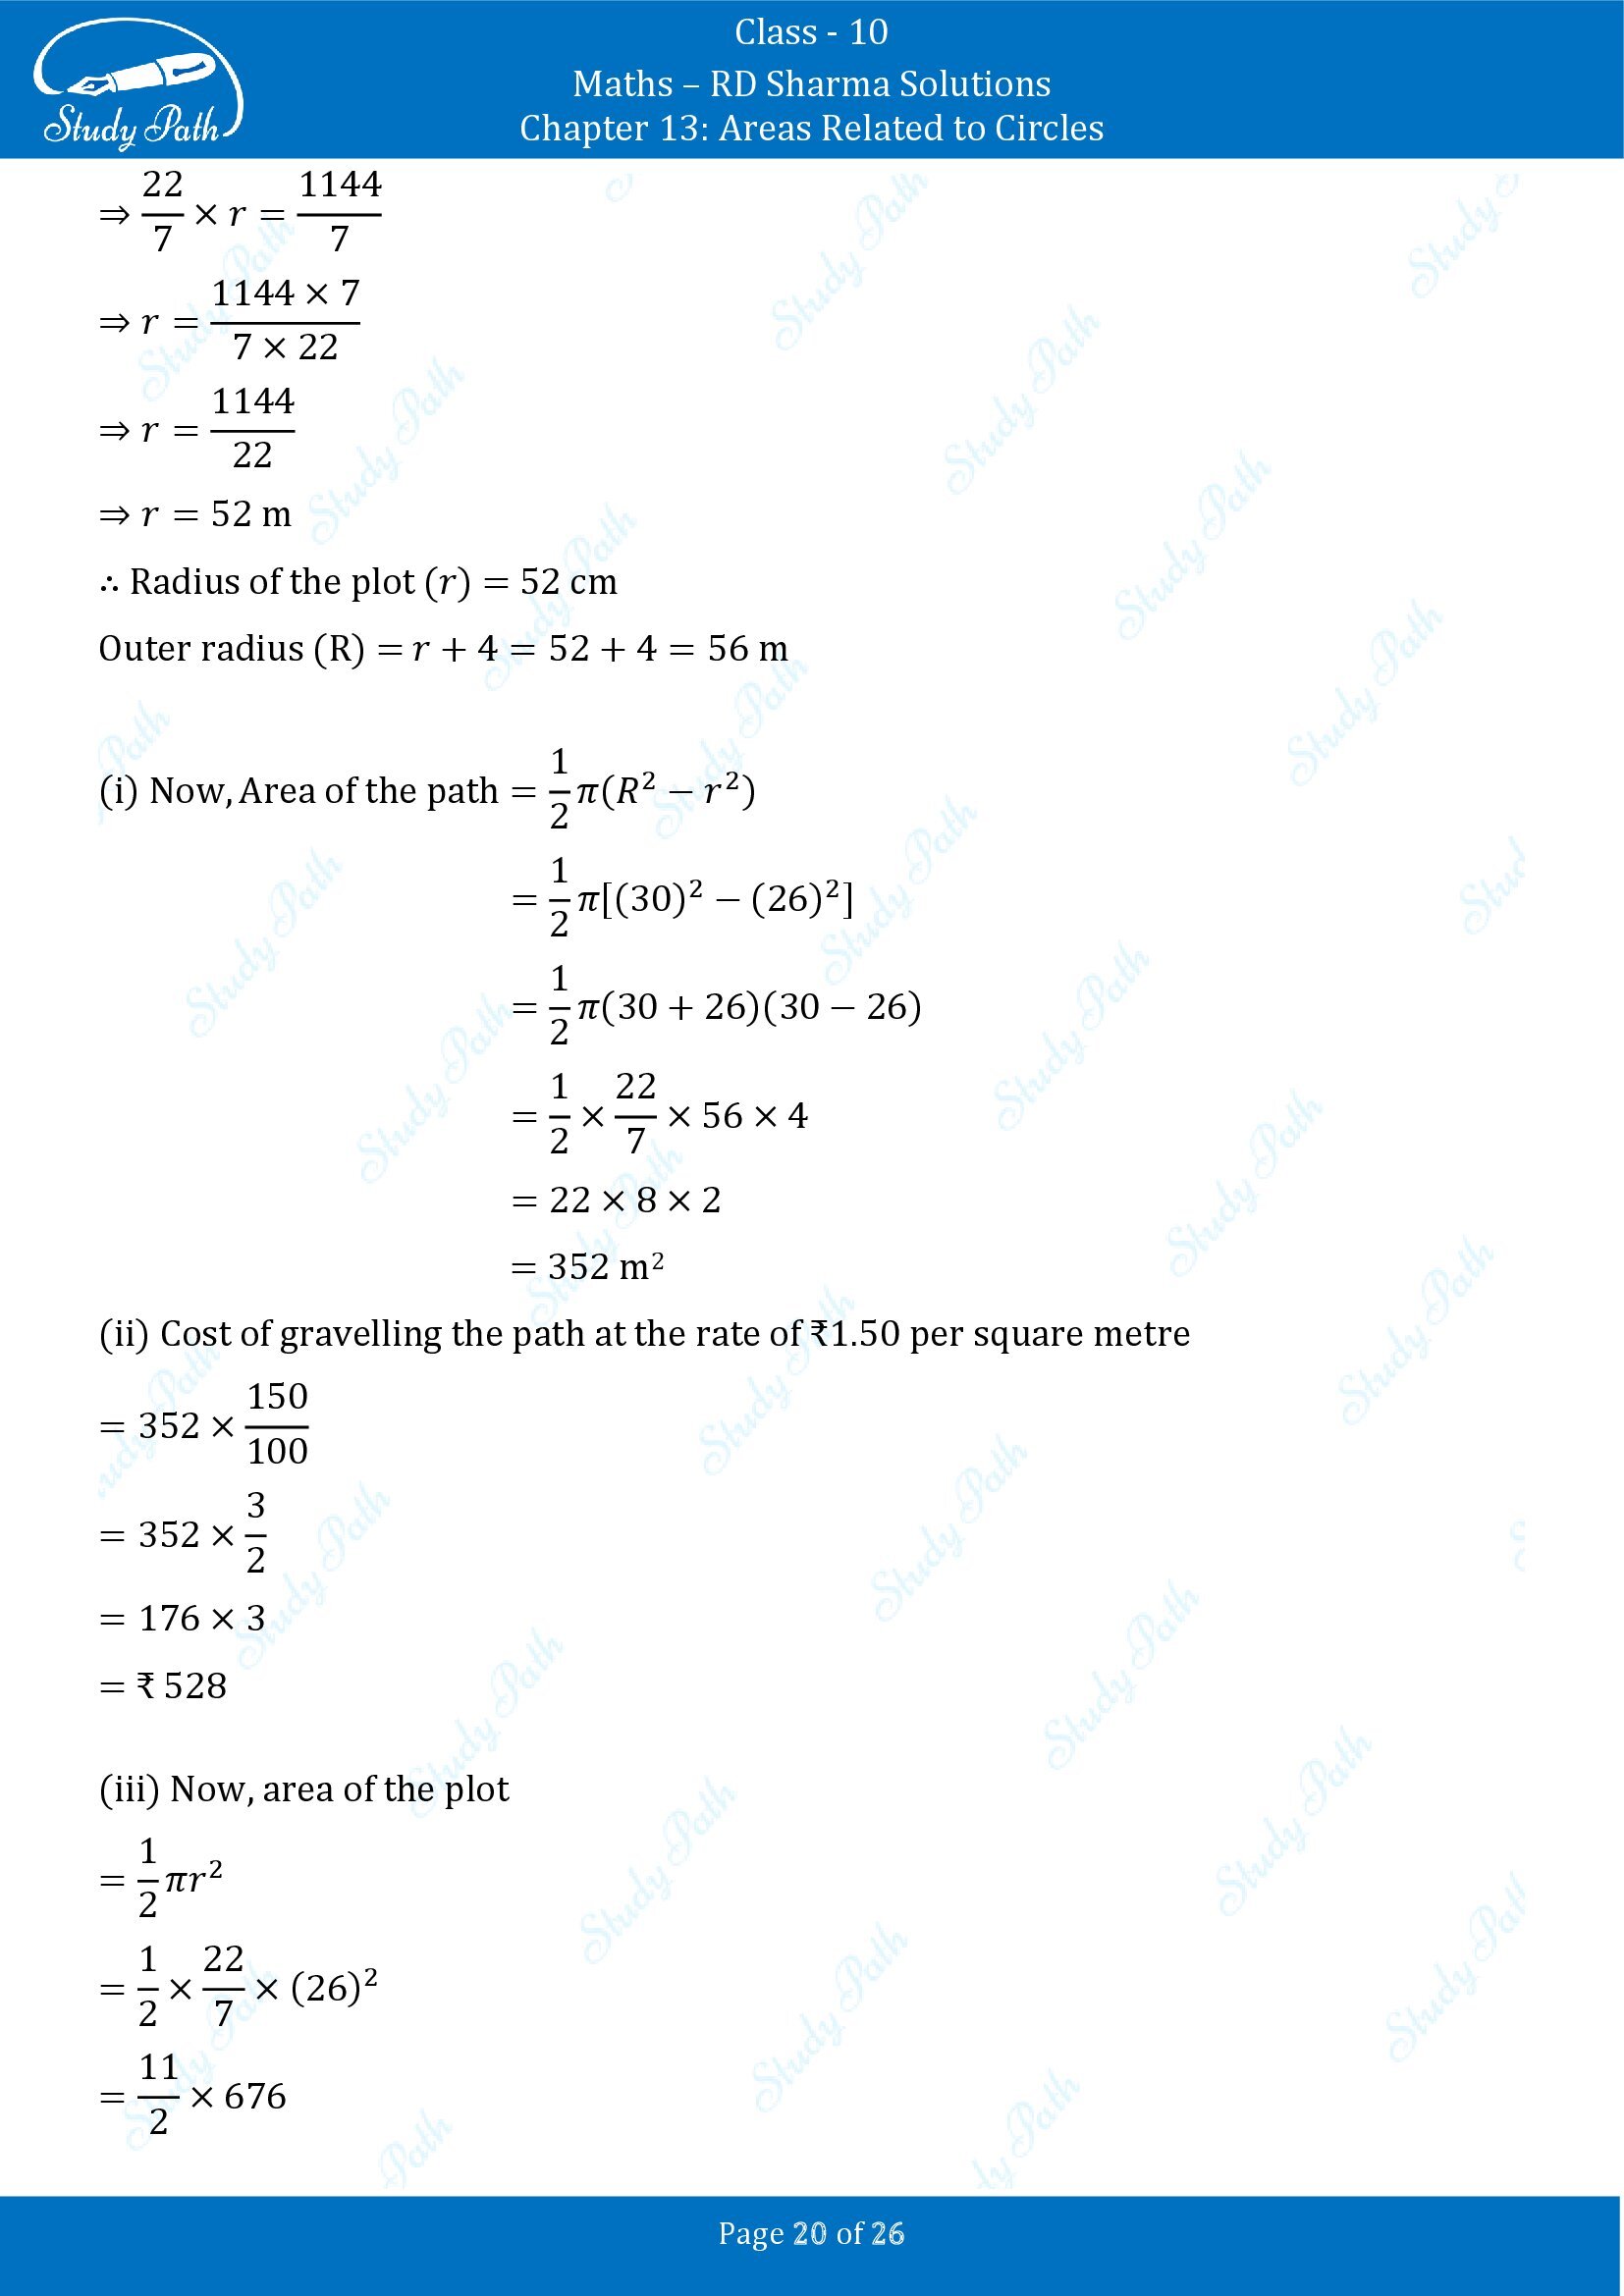 RD Sharma Solutions Class 10 Chapter 13 Areas Related to Circles Exercise 13.1 00020